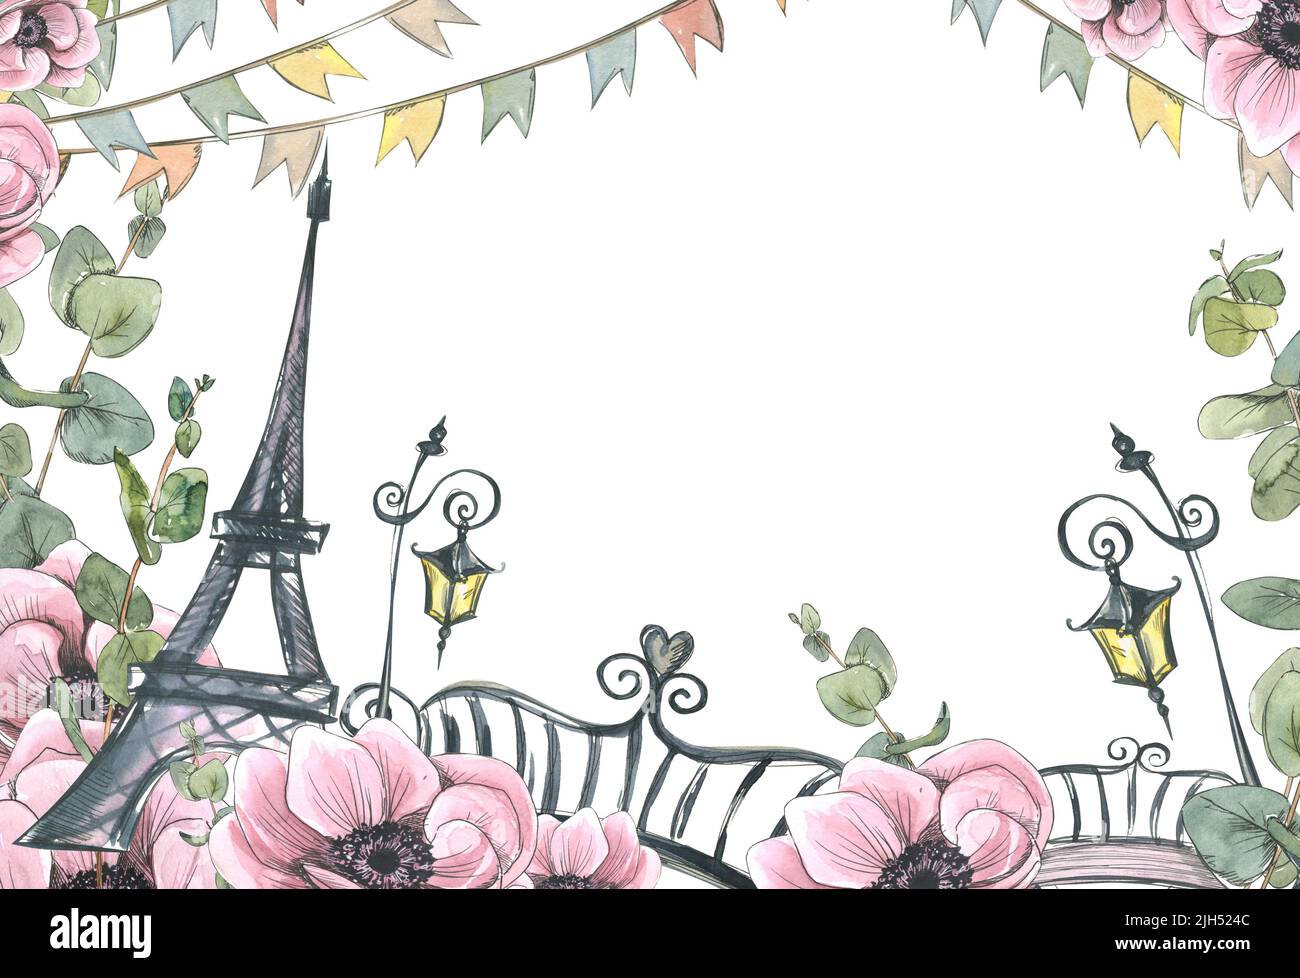 A frame with the Eiffel Tower, lanterns, a garland of flags and a bridge, anemone flowers and eucalyptus twigs. Watercolor illustration in sketch Stock Photo